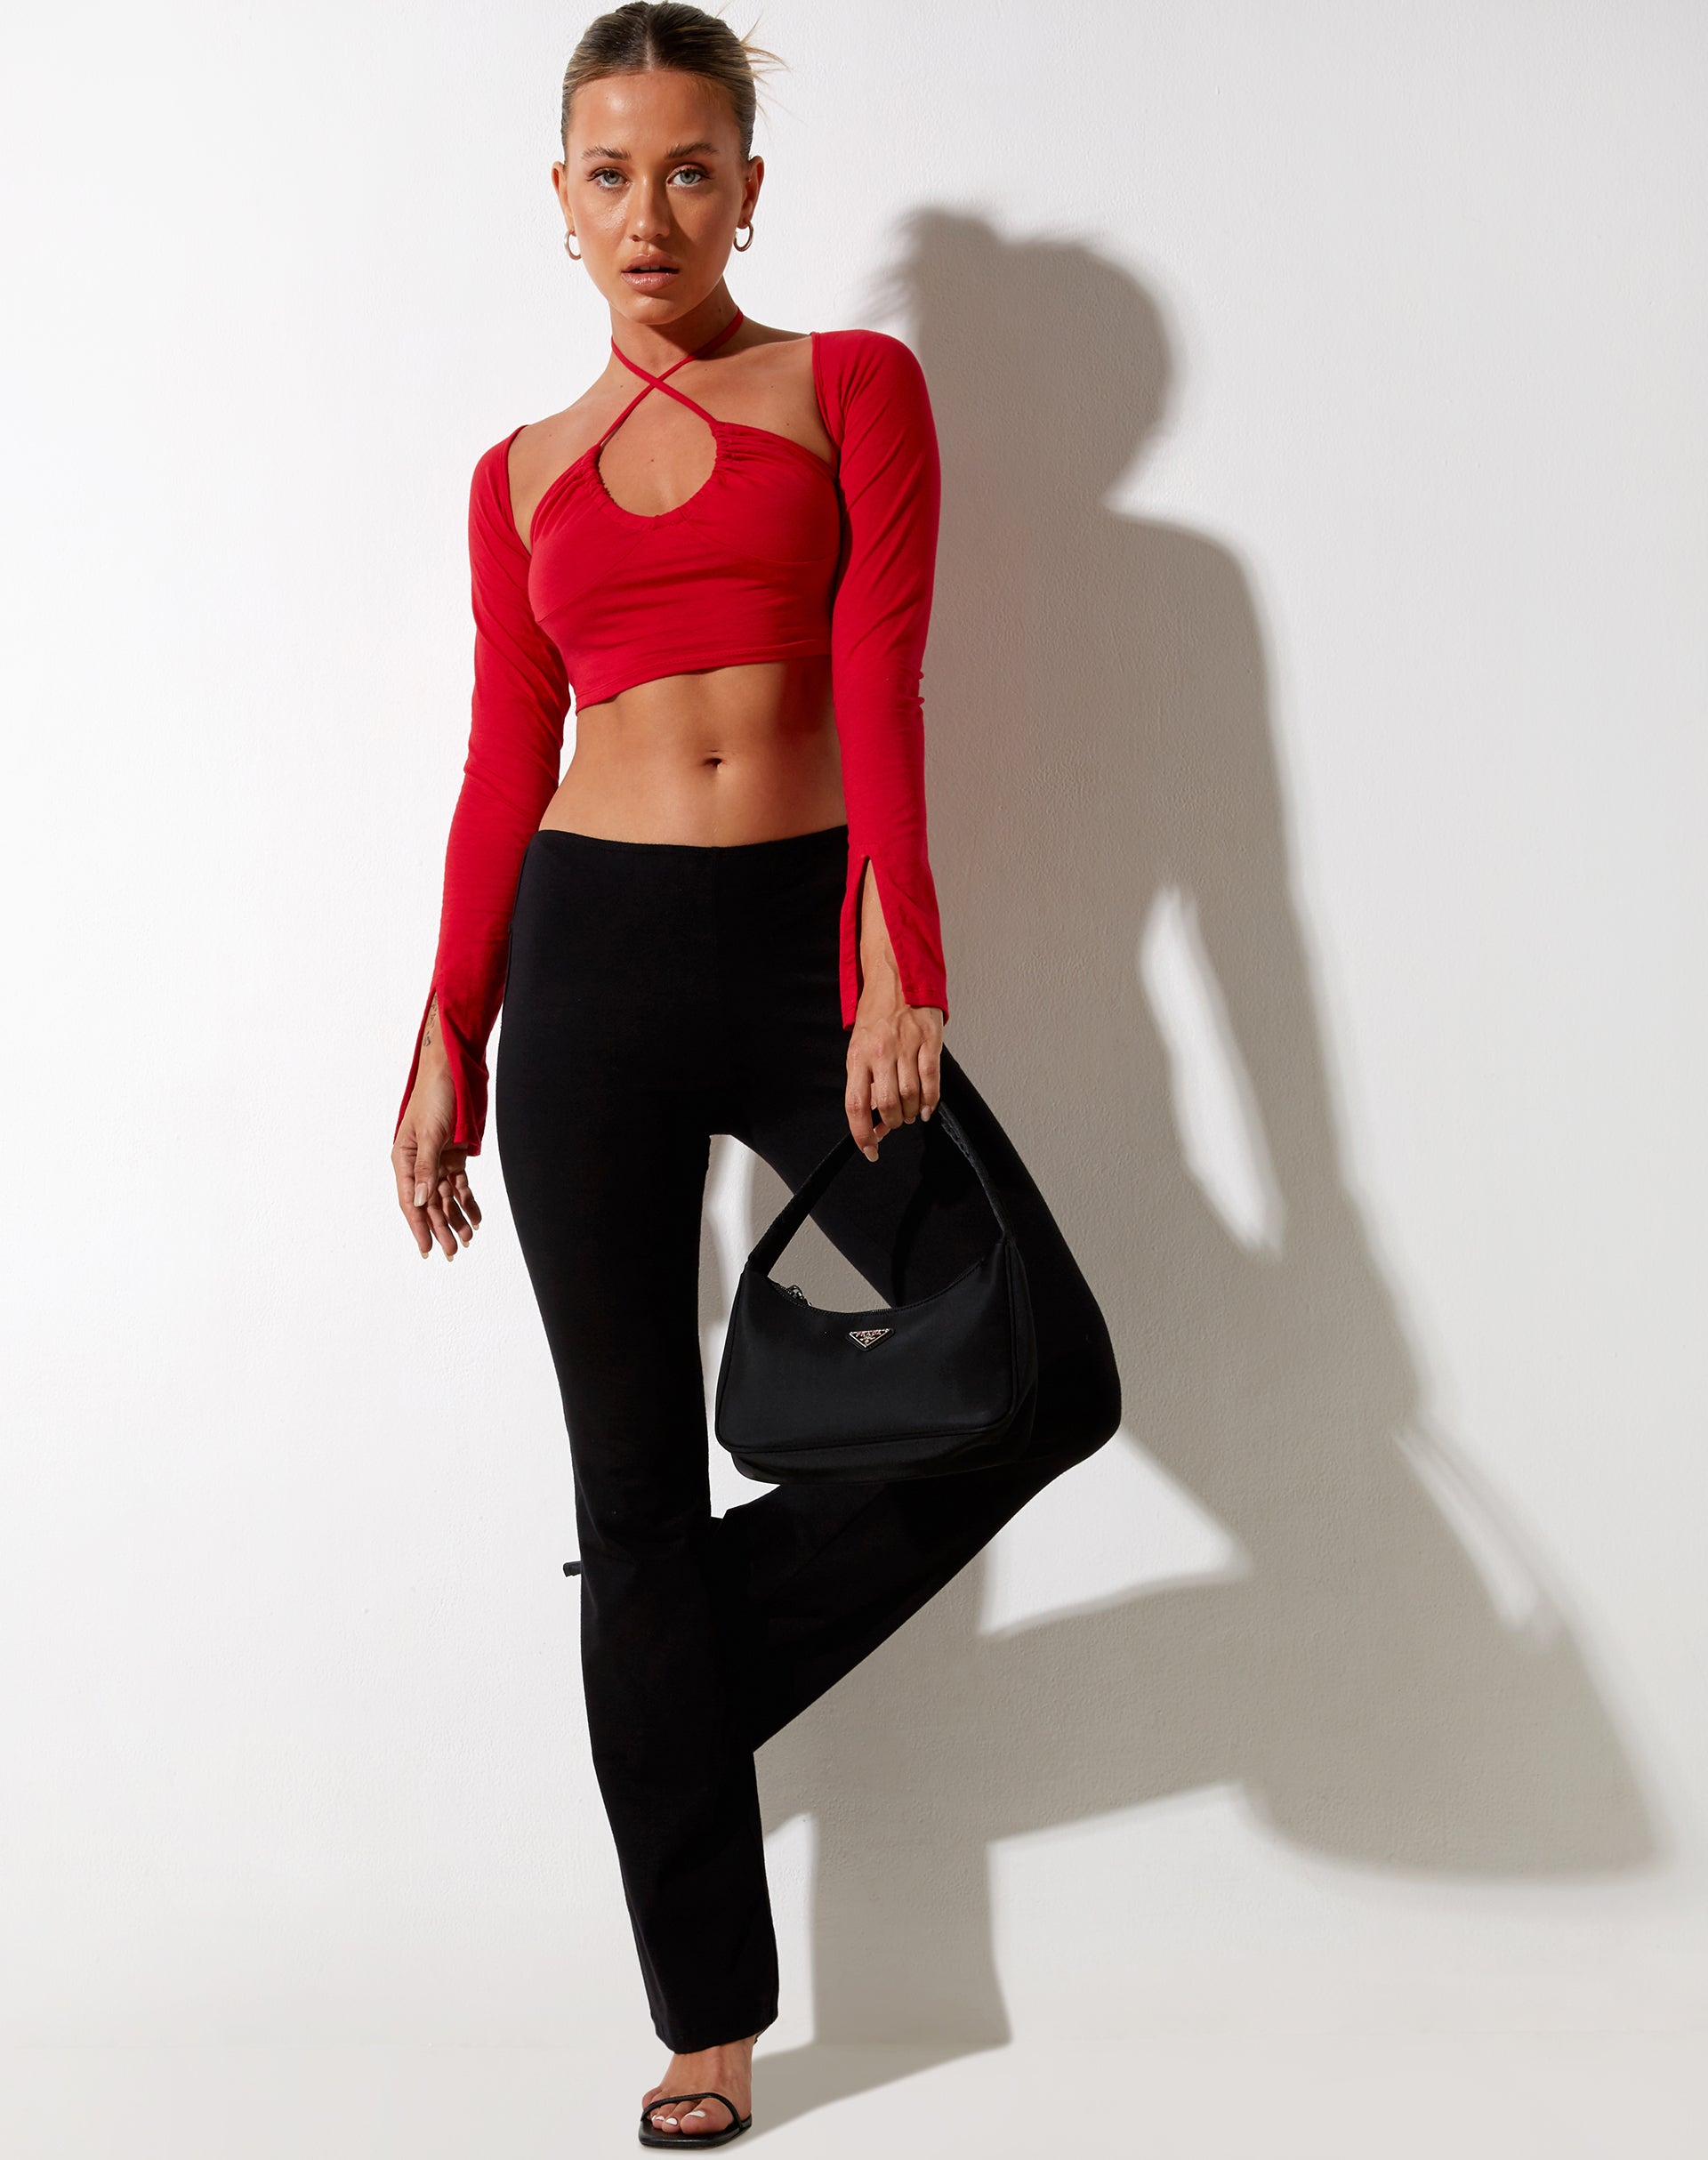 Image of Sira Crop Top in Racing Red